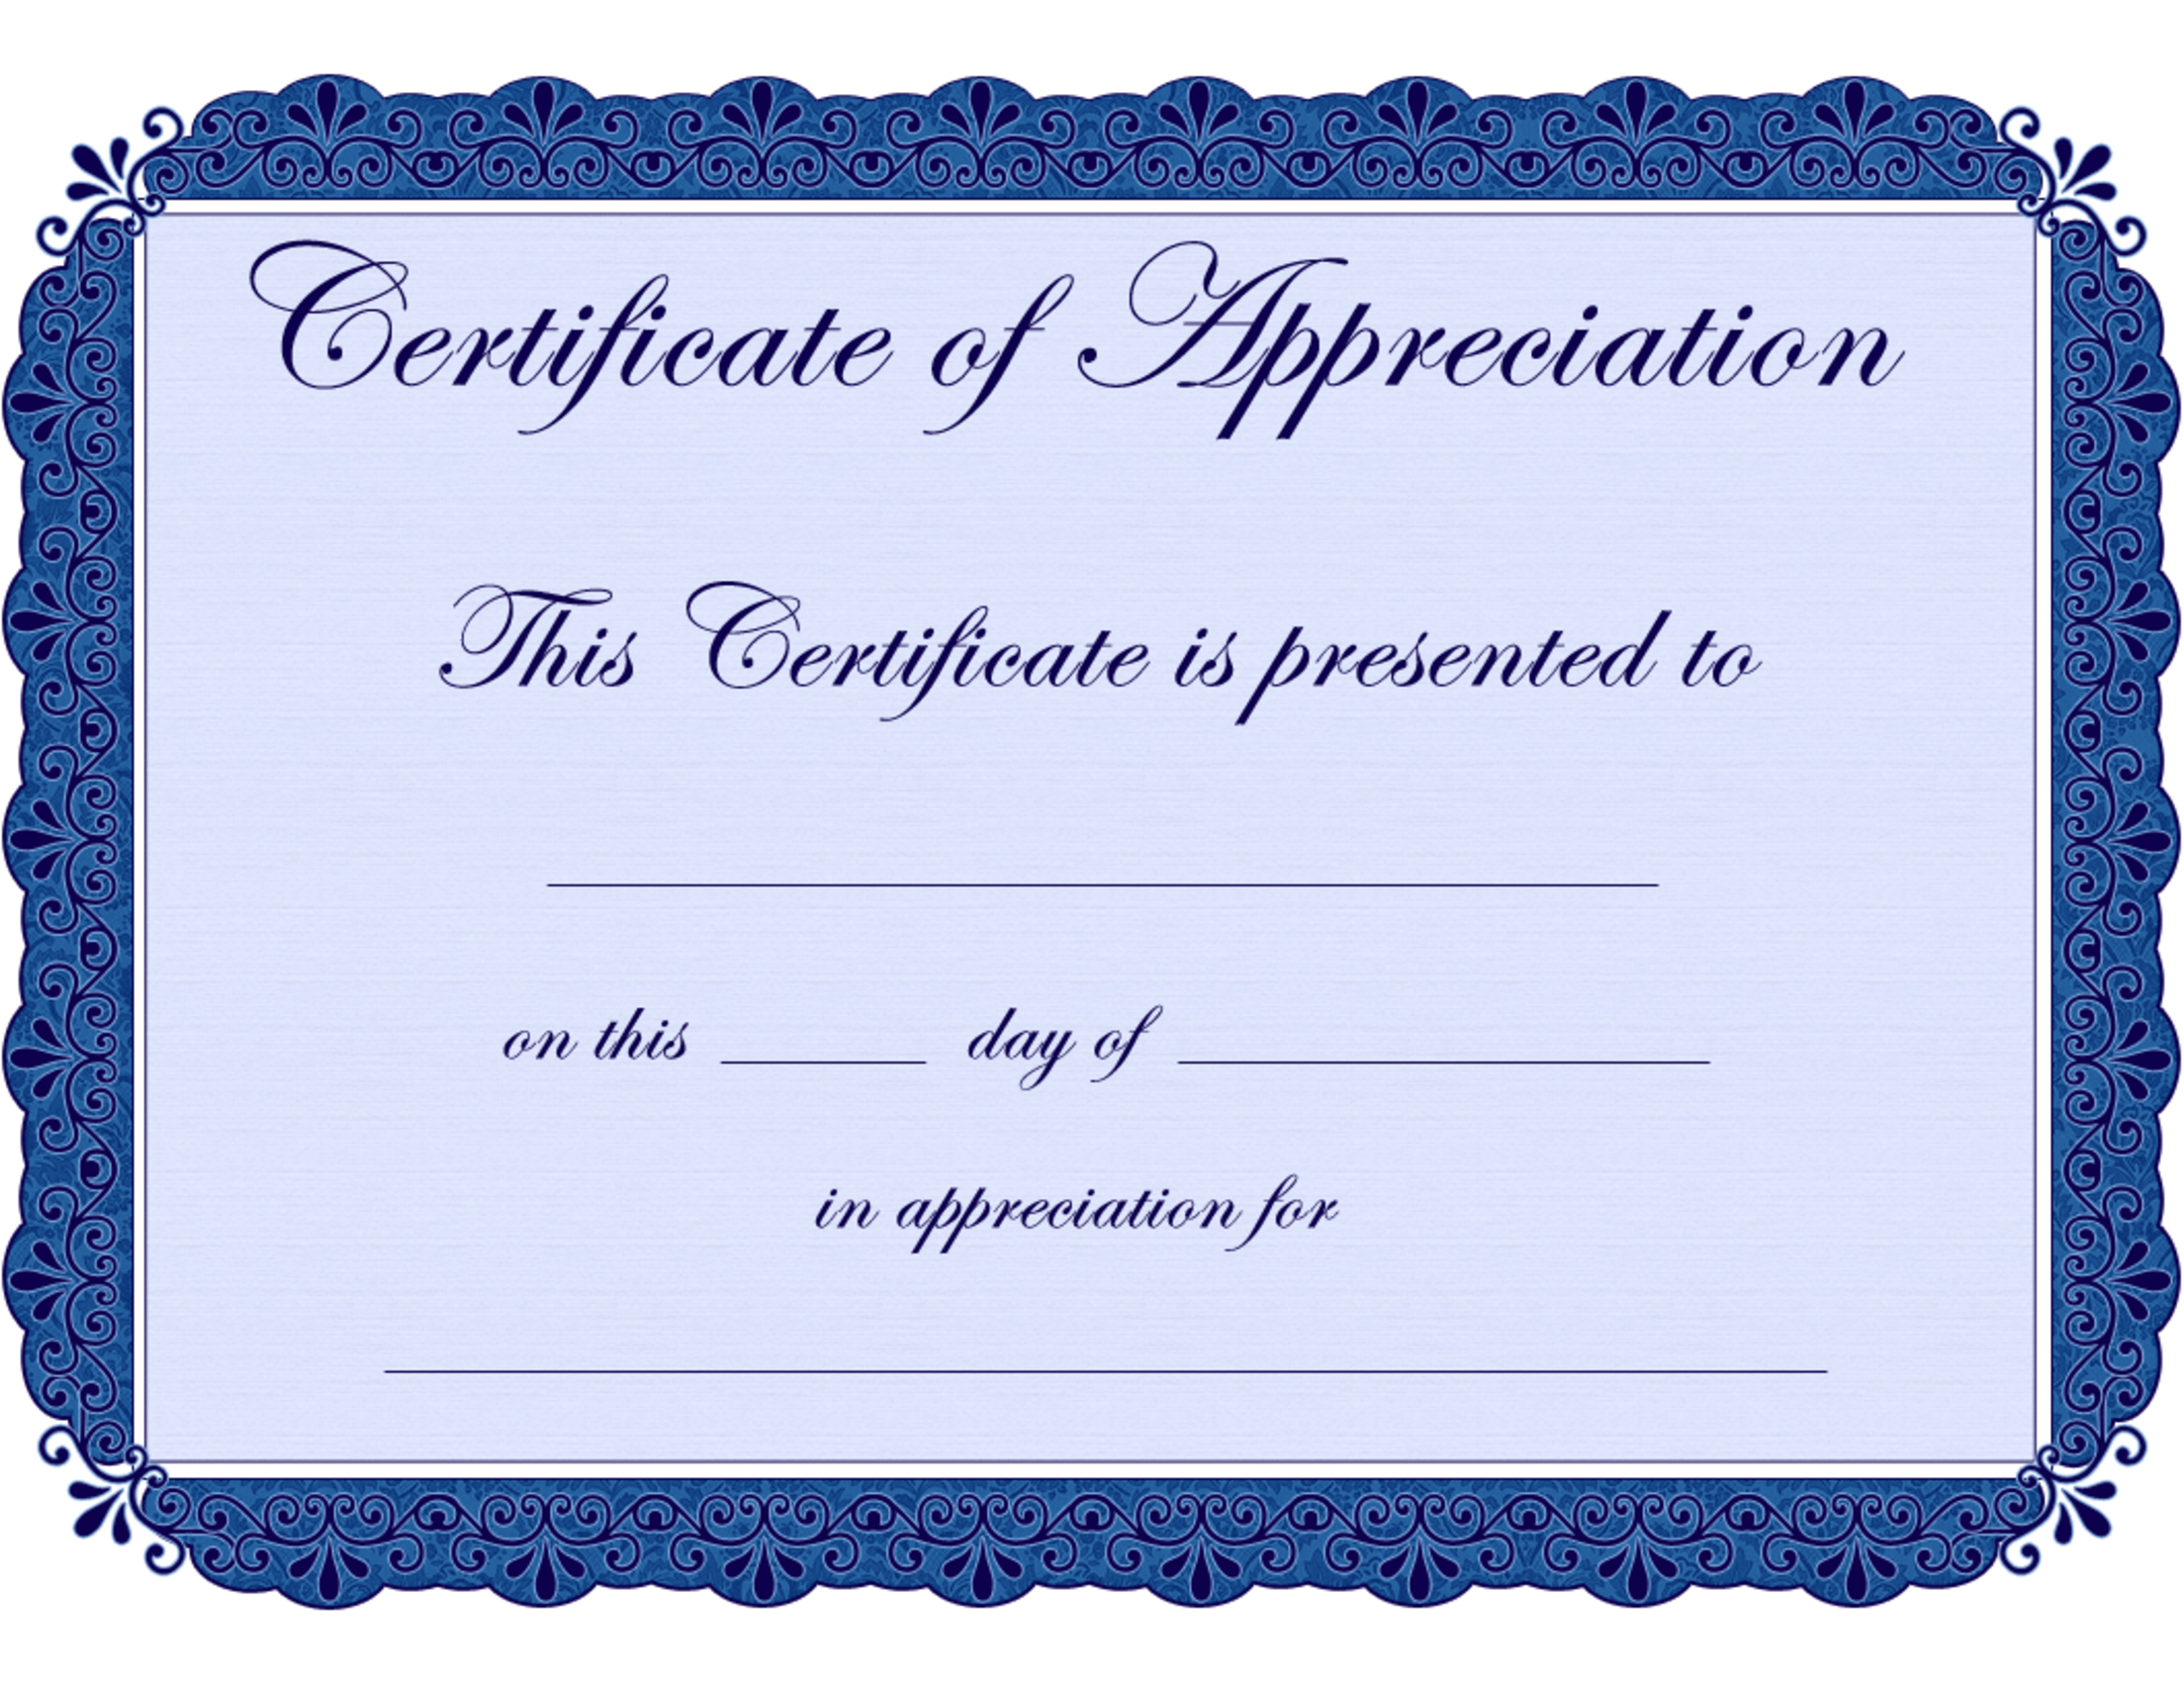 Free Printable Certificates Certificate Of Appreciation Certificate - Free Printable Blank Certificate Templates